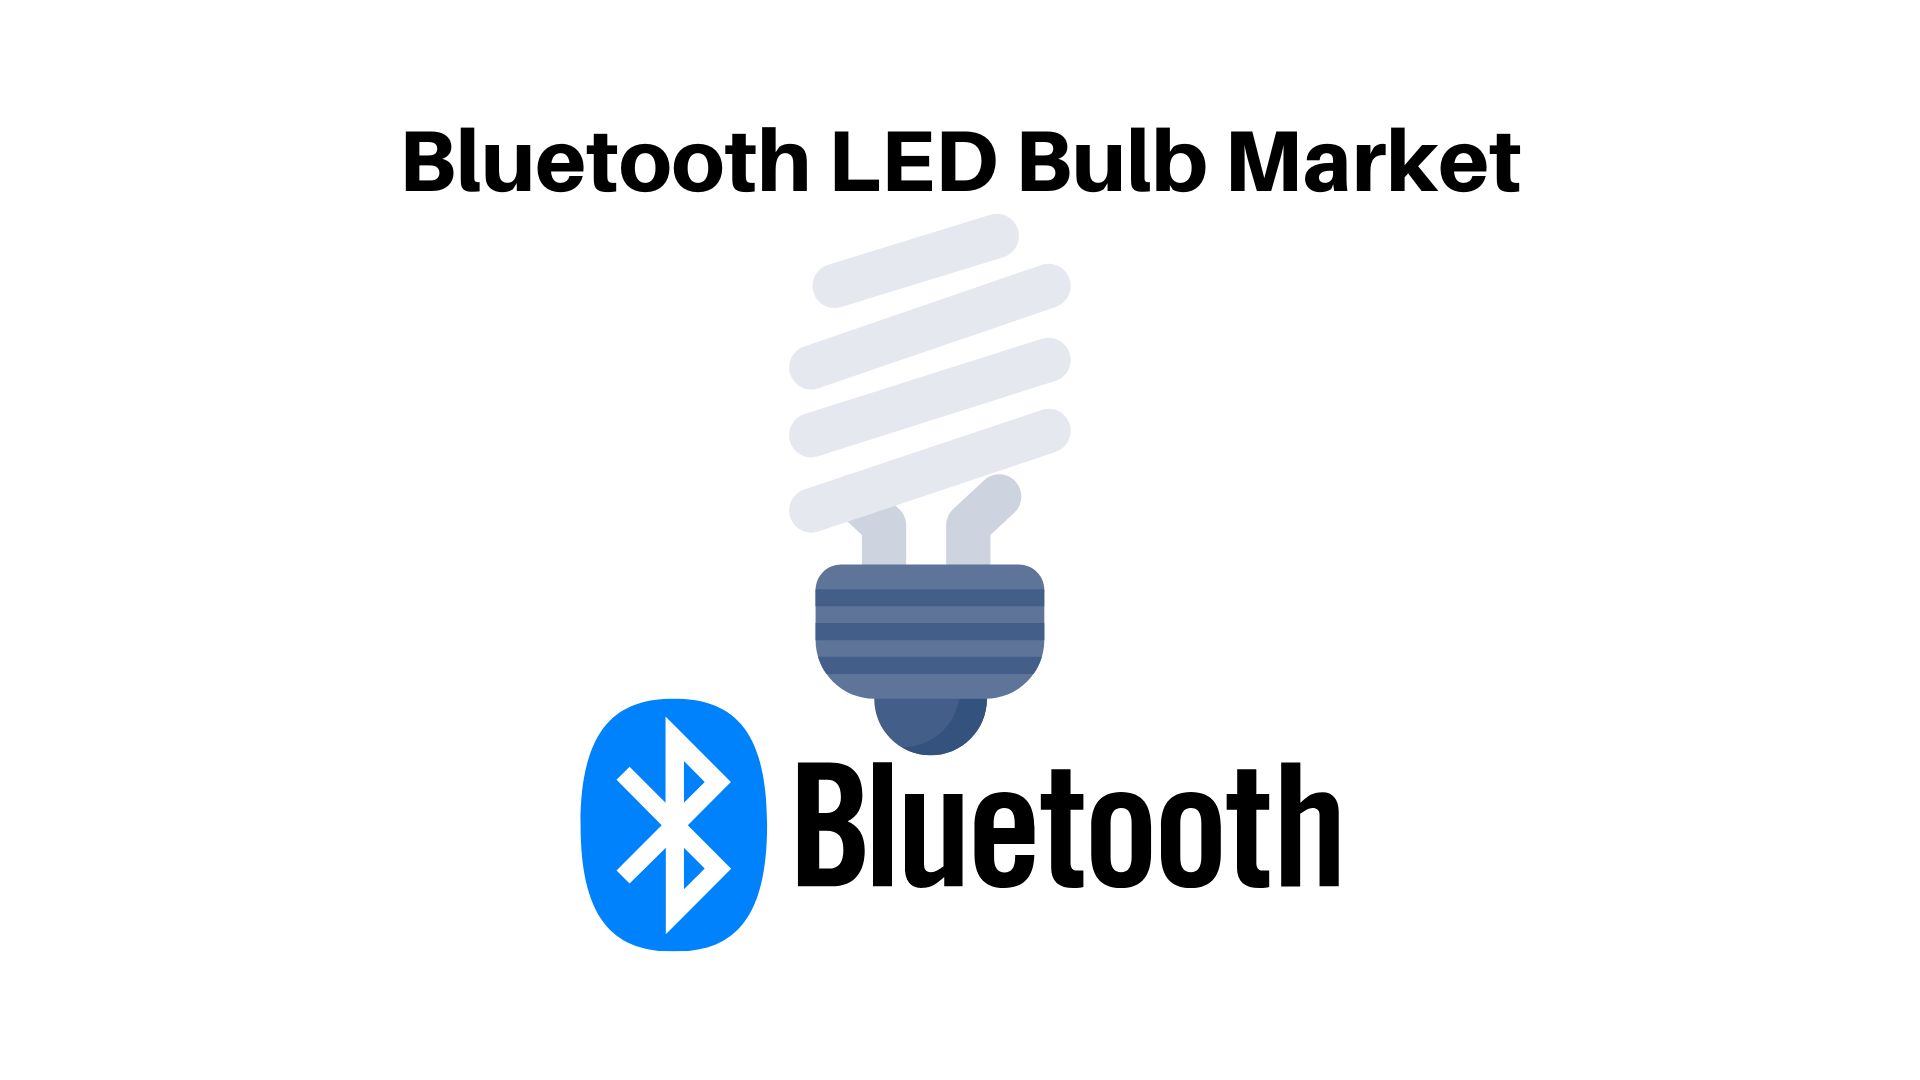 Bluetooth LED Bulb Market to Reach USD 407.9 Million by 2032, Says Market.us Research Study